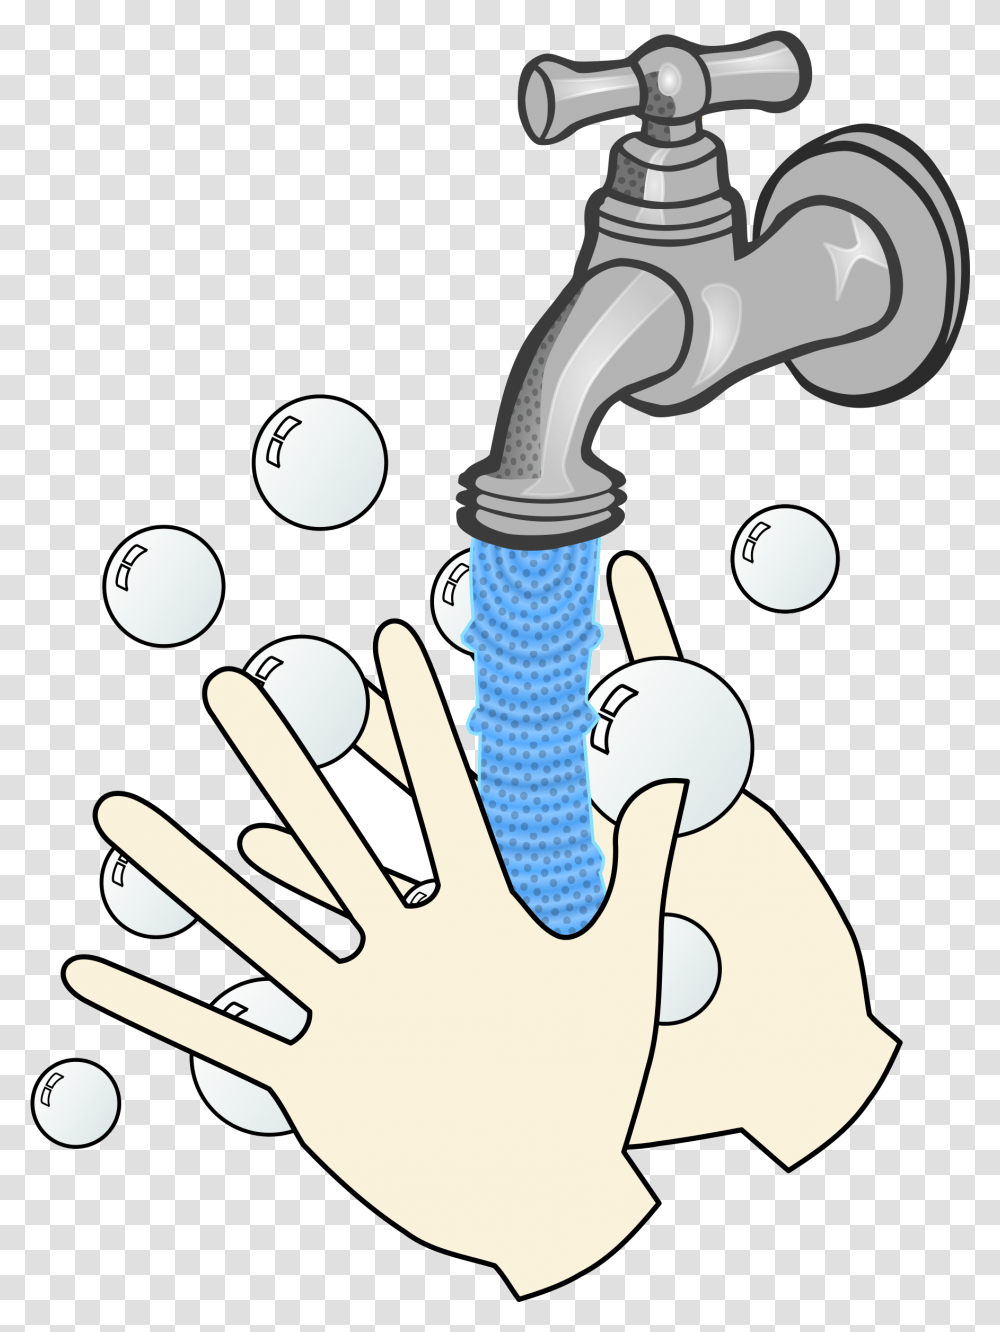 Download Running Water Images Wash Your Hands With Soap And Water, Indoors, Sink Faucet, Washing Transparent Png